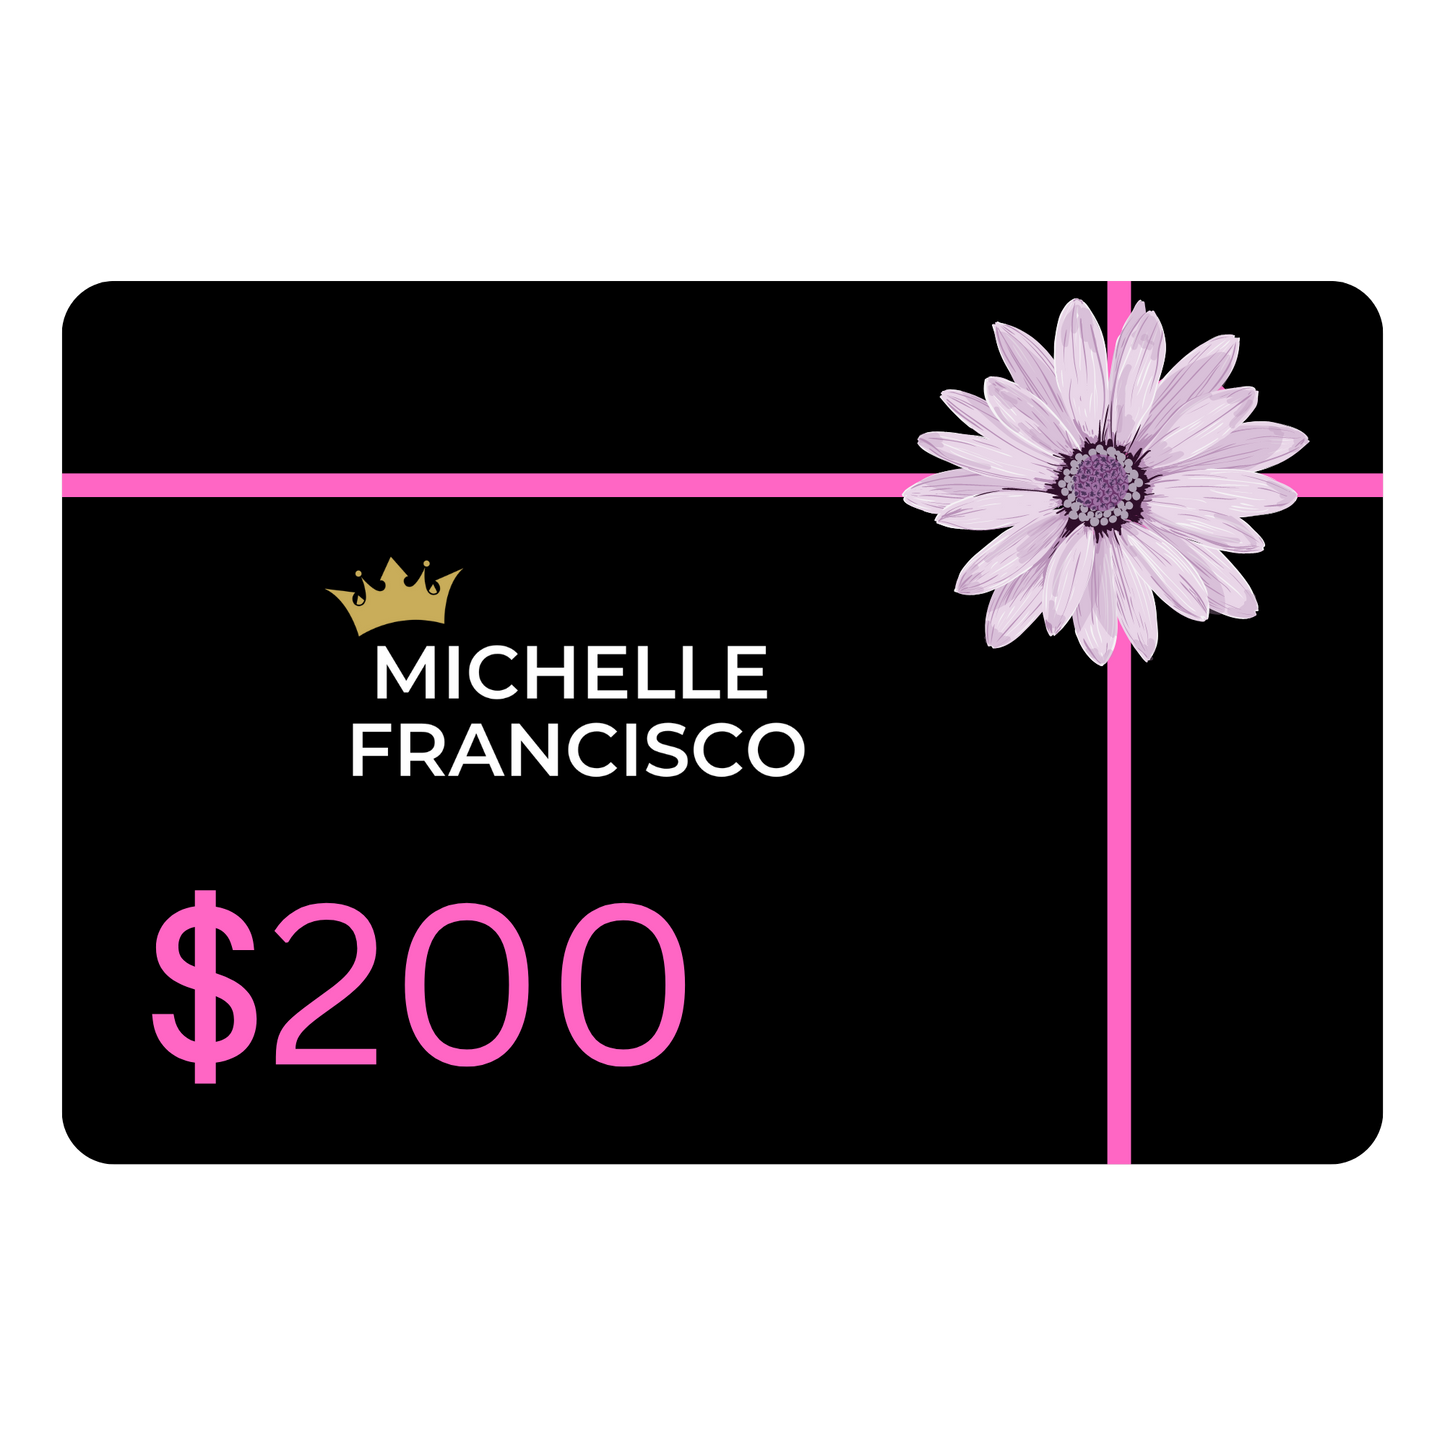 Michelle Francisco Beauty Gift Card - Michelle Francisco